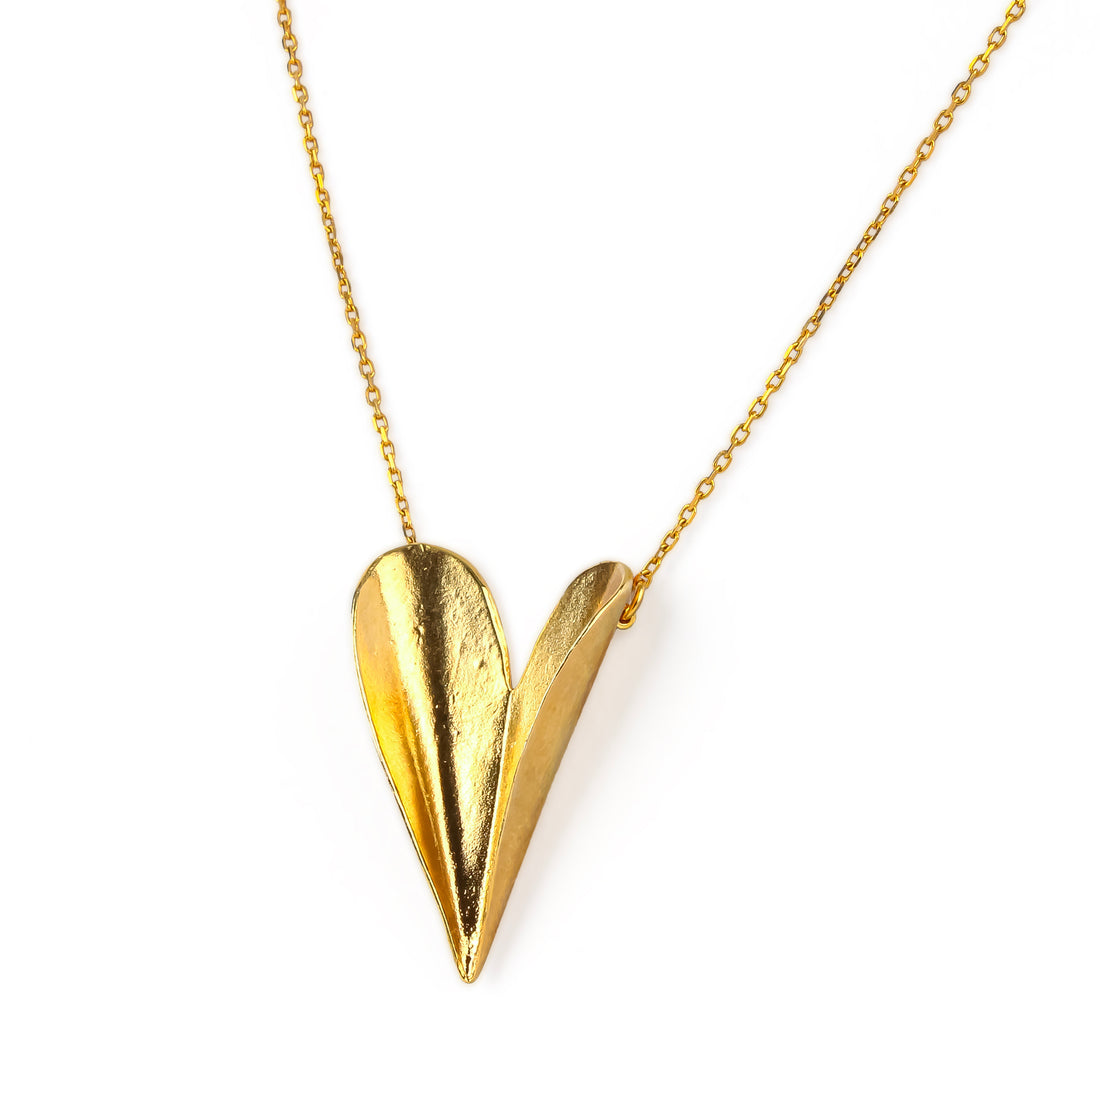 MIRIT WEINSTOCK 24K Gold-Plated Sterling Silver Folded Heart Pendant Necklace